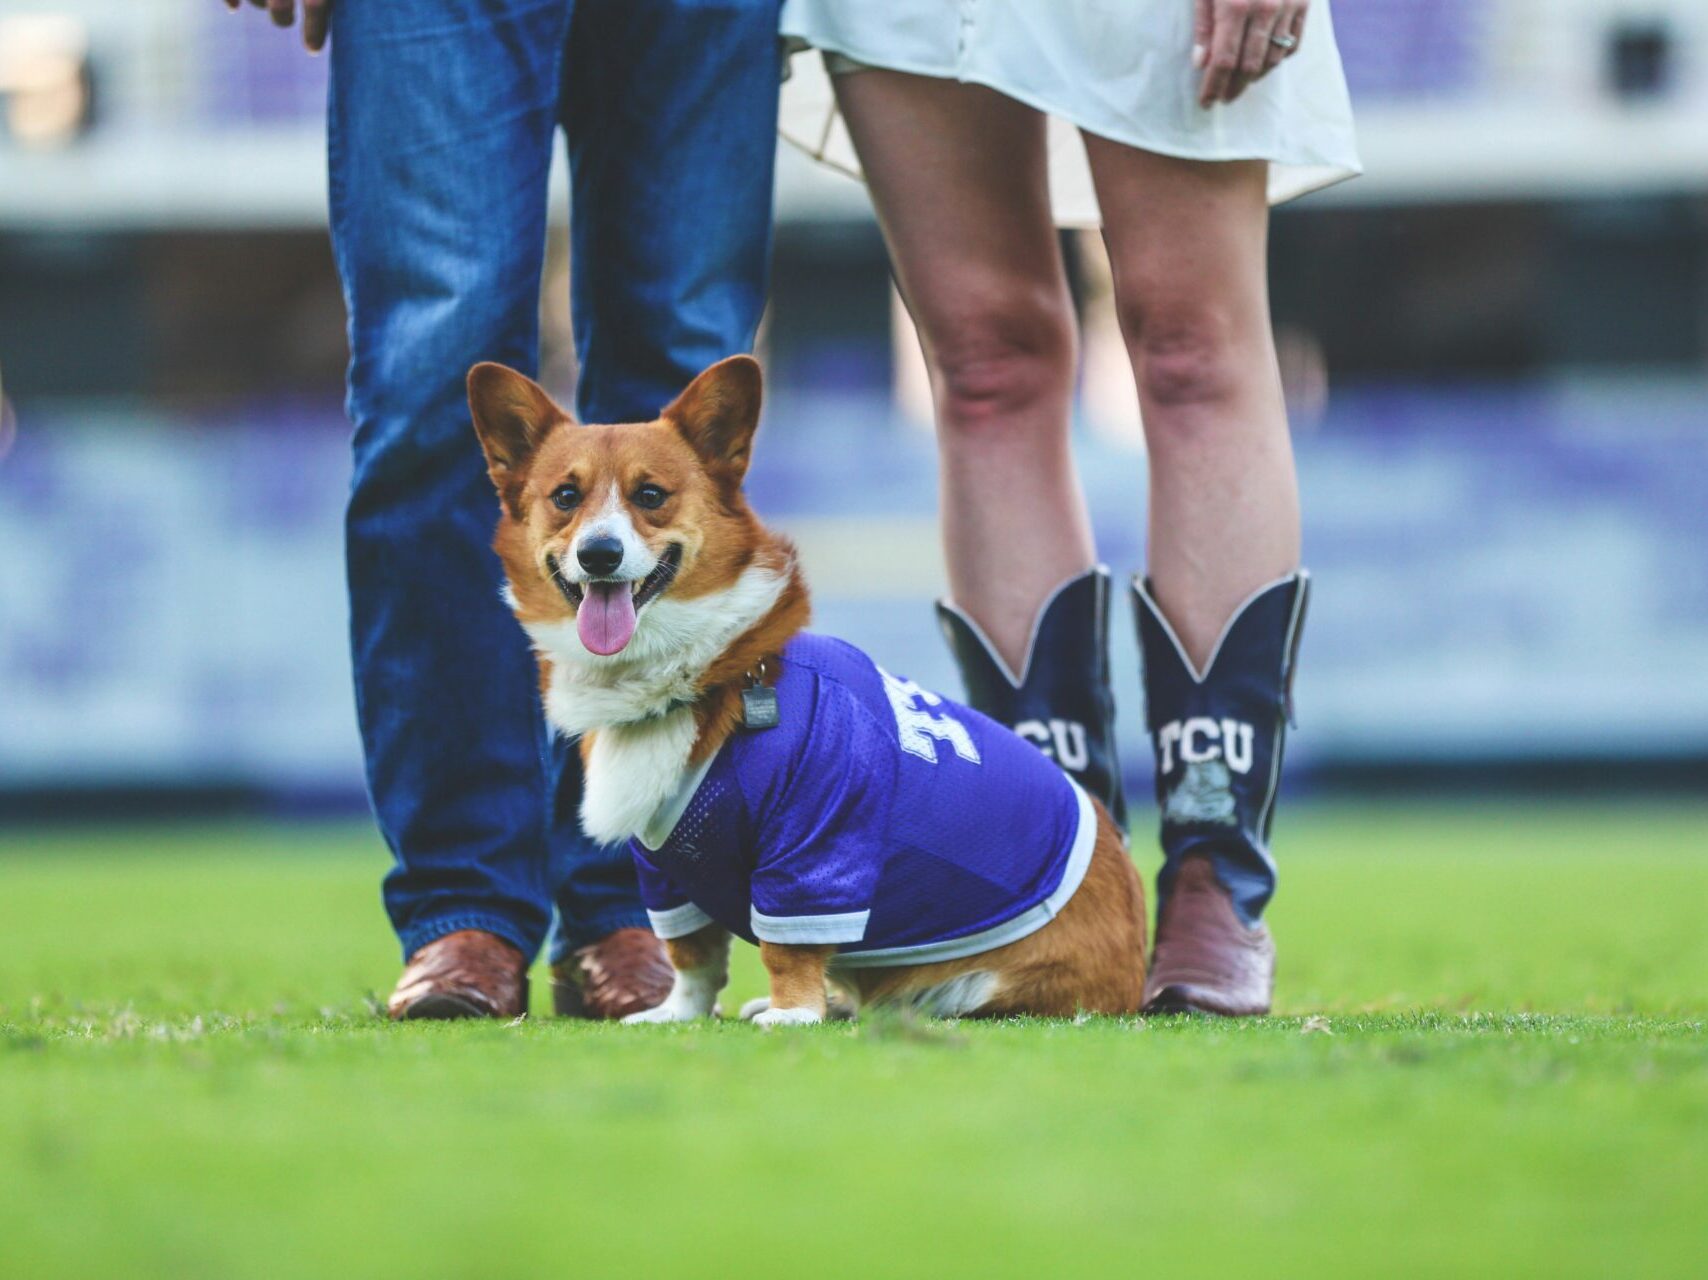 Small Corgi dog in front of 2 Texas Christian University fans in boots on a green football field